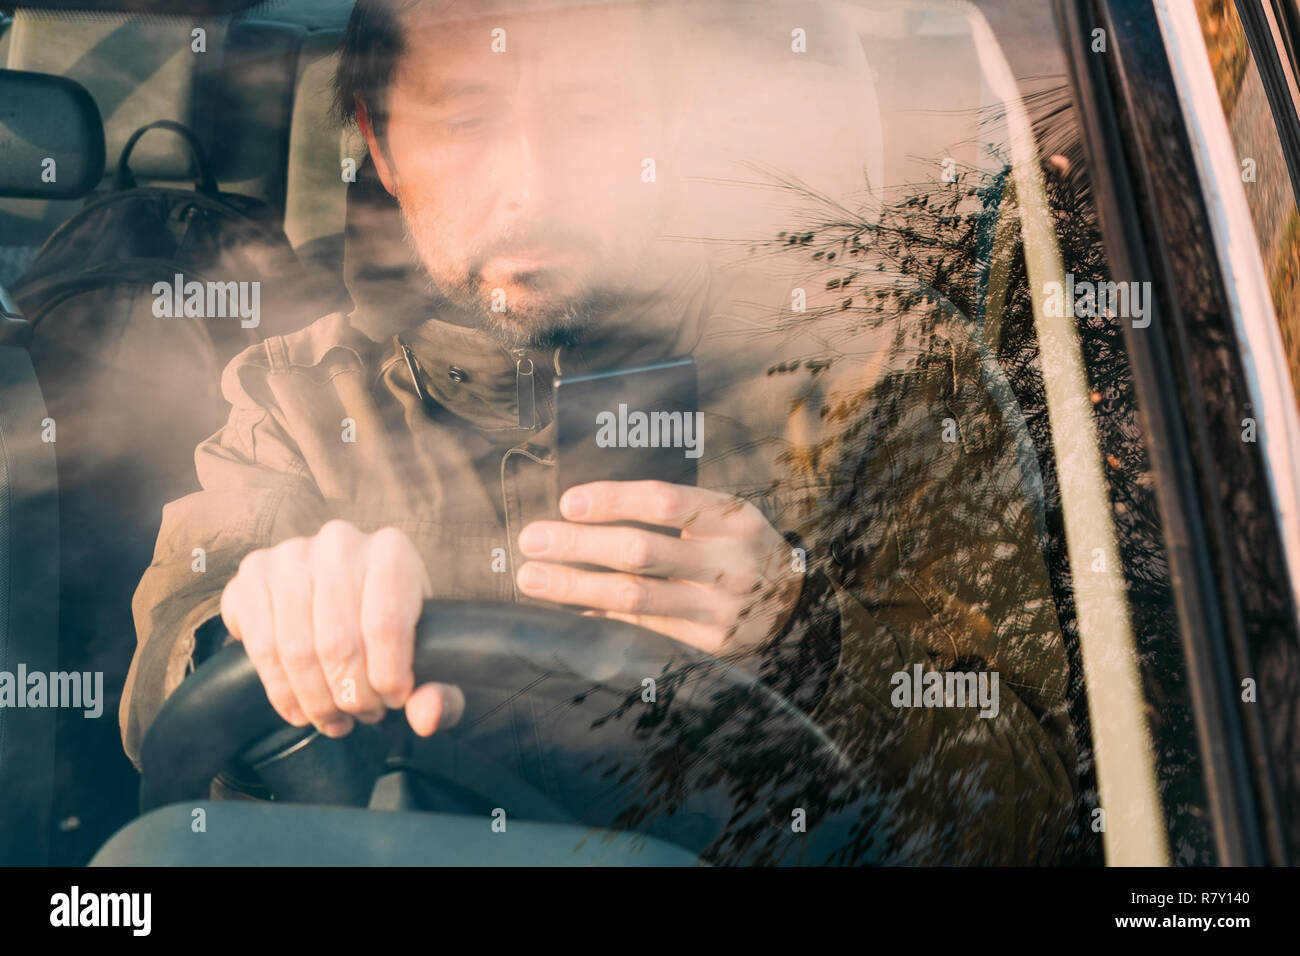 Front view of man driving car and texting on mobile phone which is dangerous and reckless behavior Stock Photo